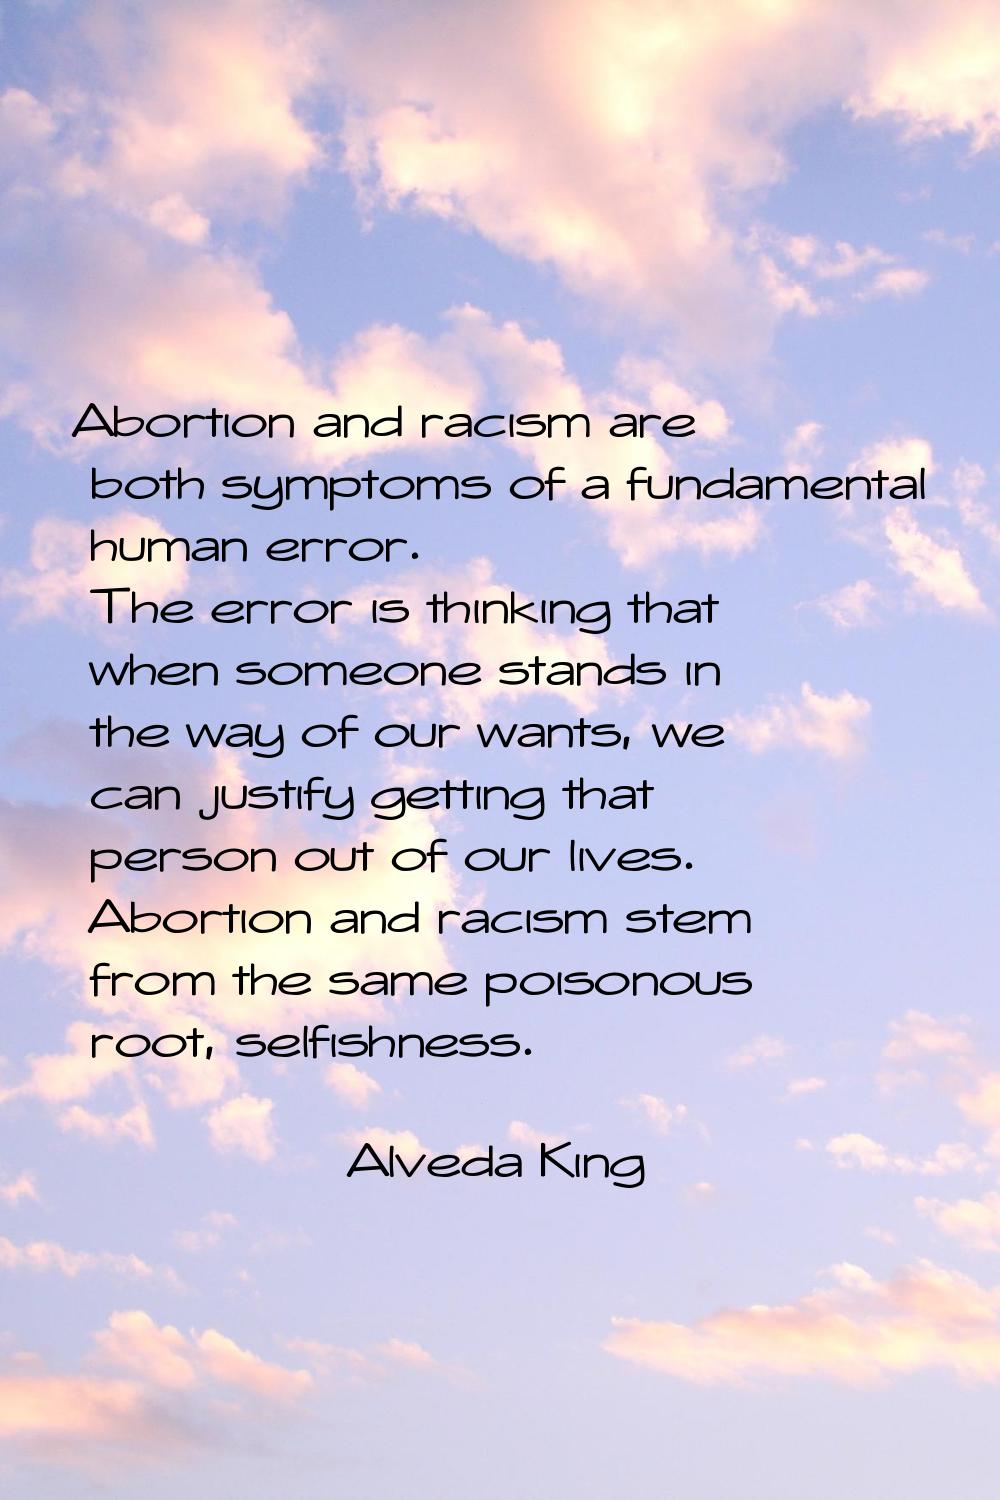 Abortion and racism are both symptoms of a fundamental human error. The error is thinking that when